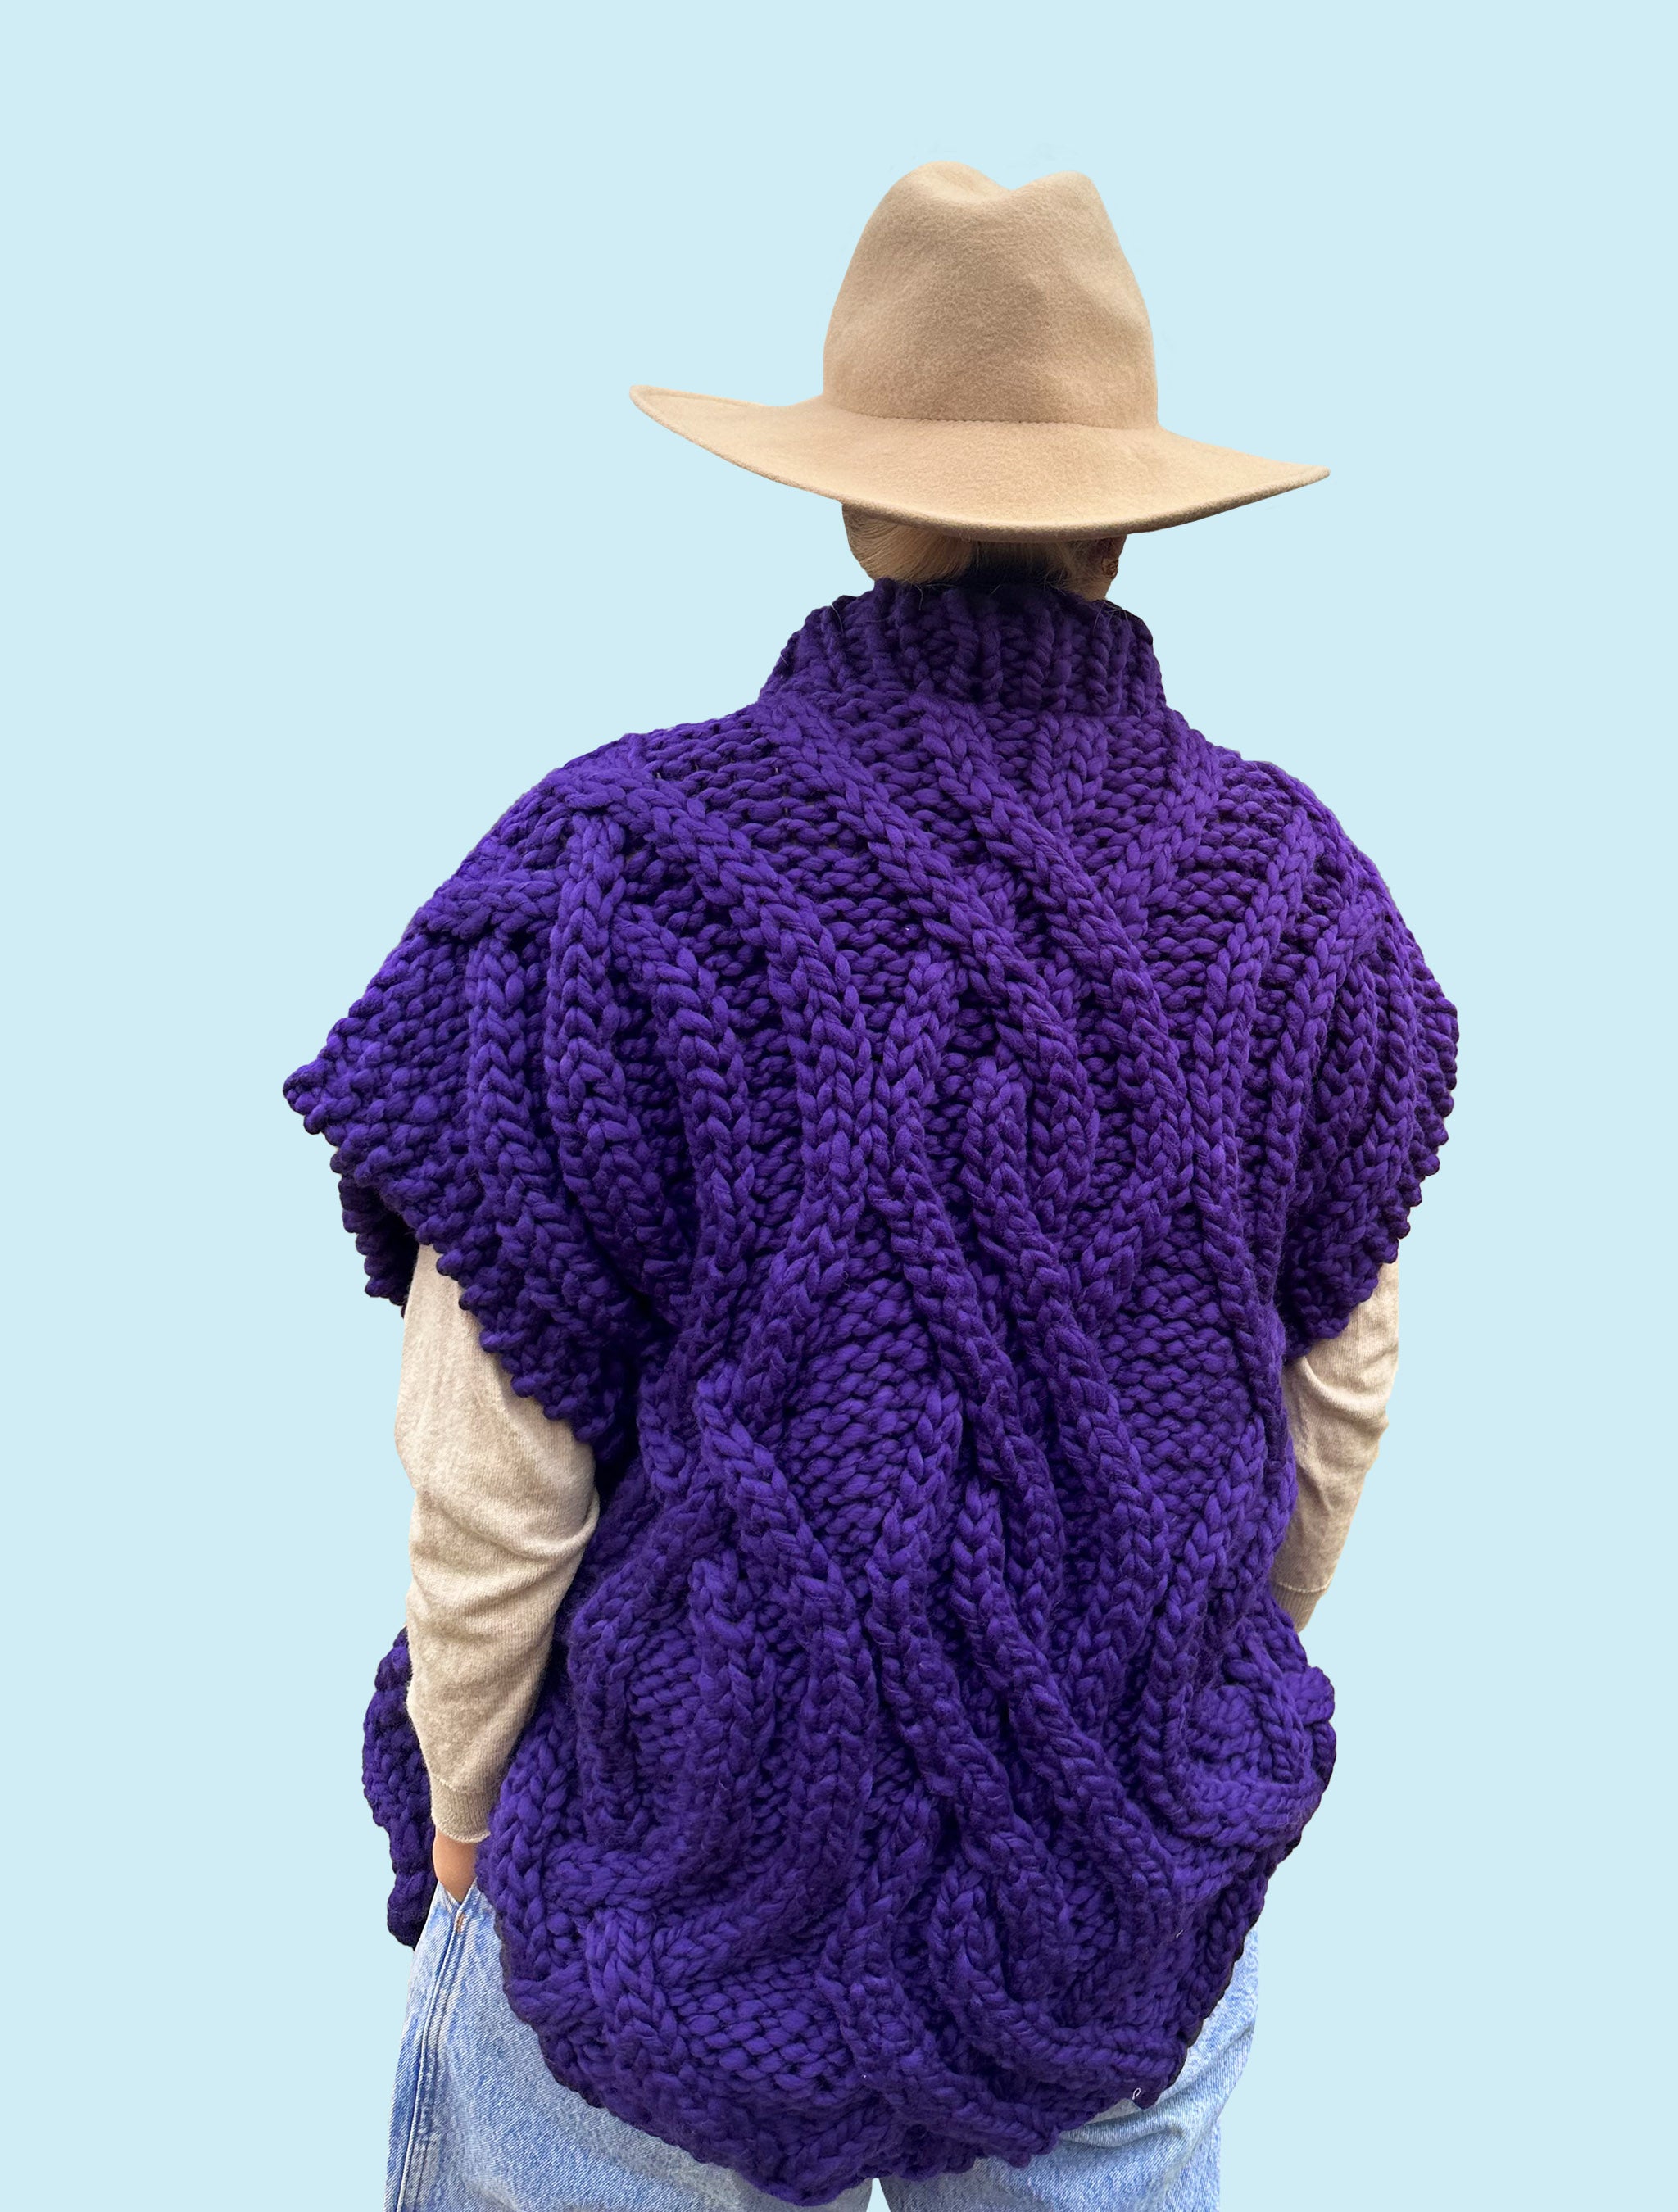 Cozy Poncho with Cables All Over!, Knitting Pattern